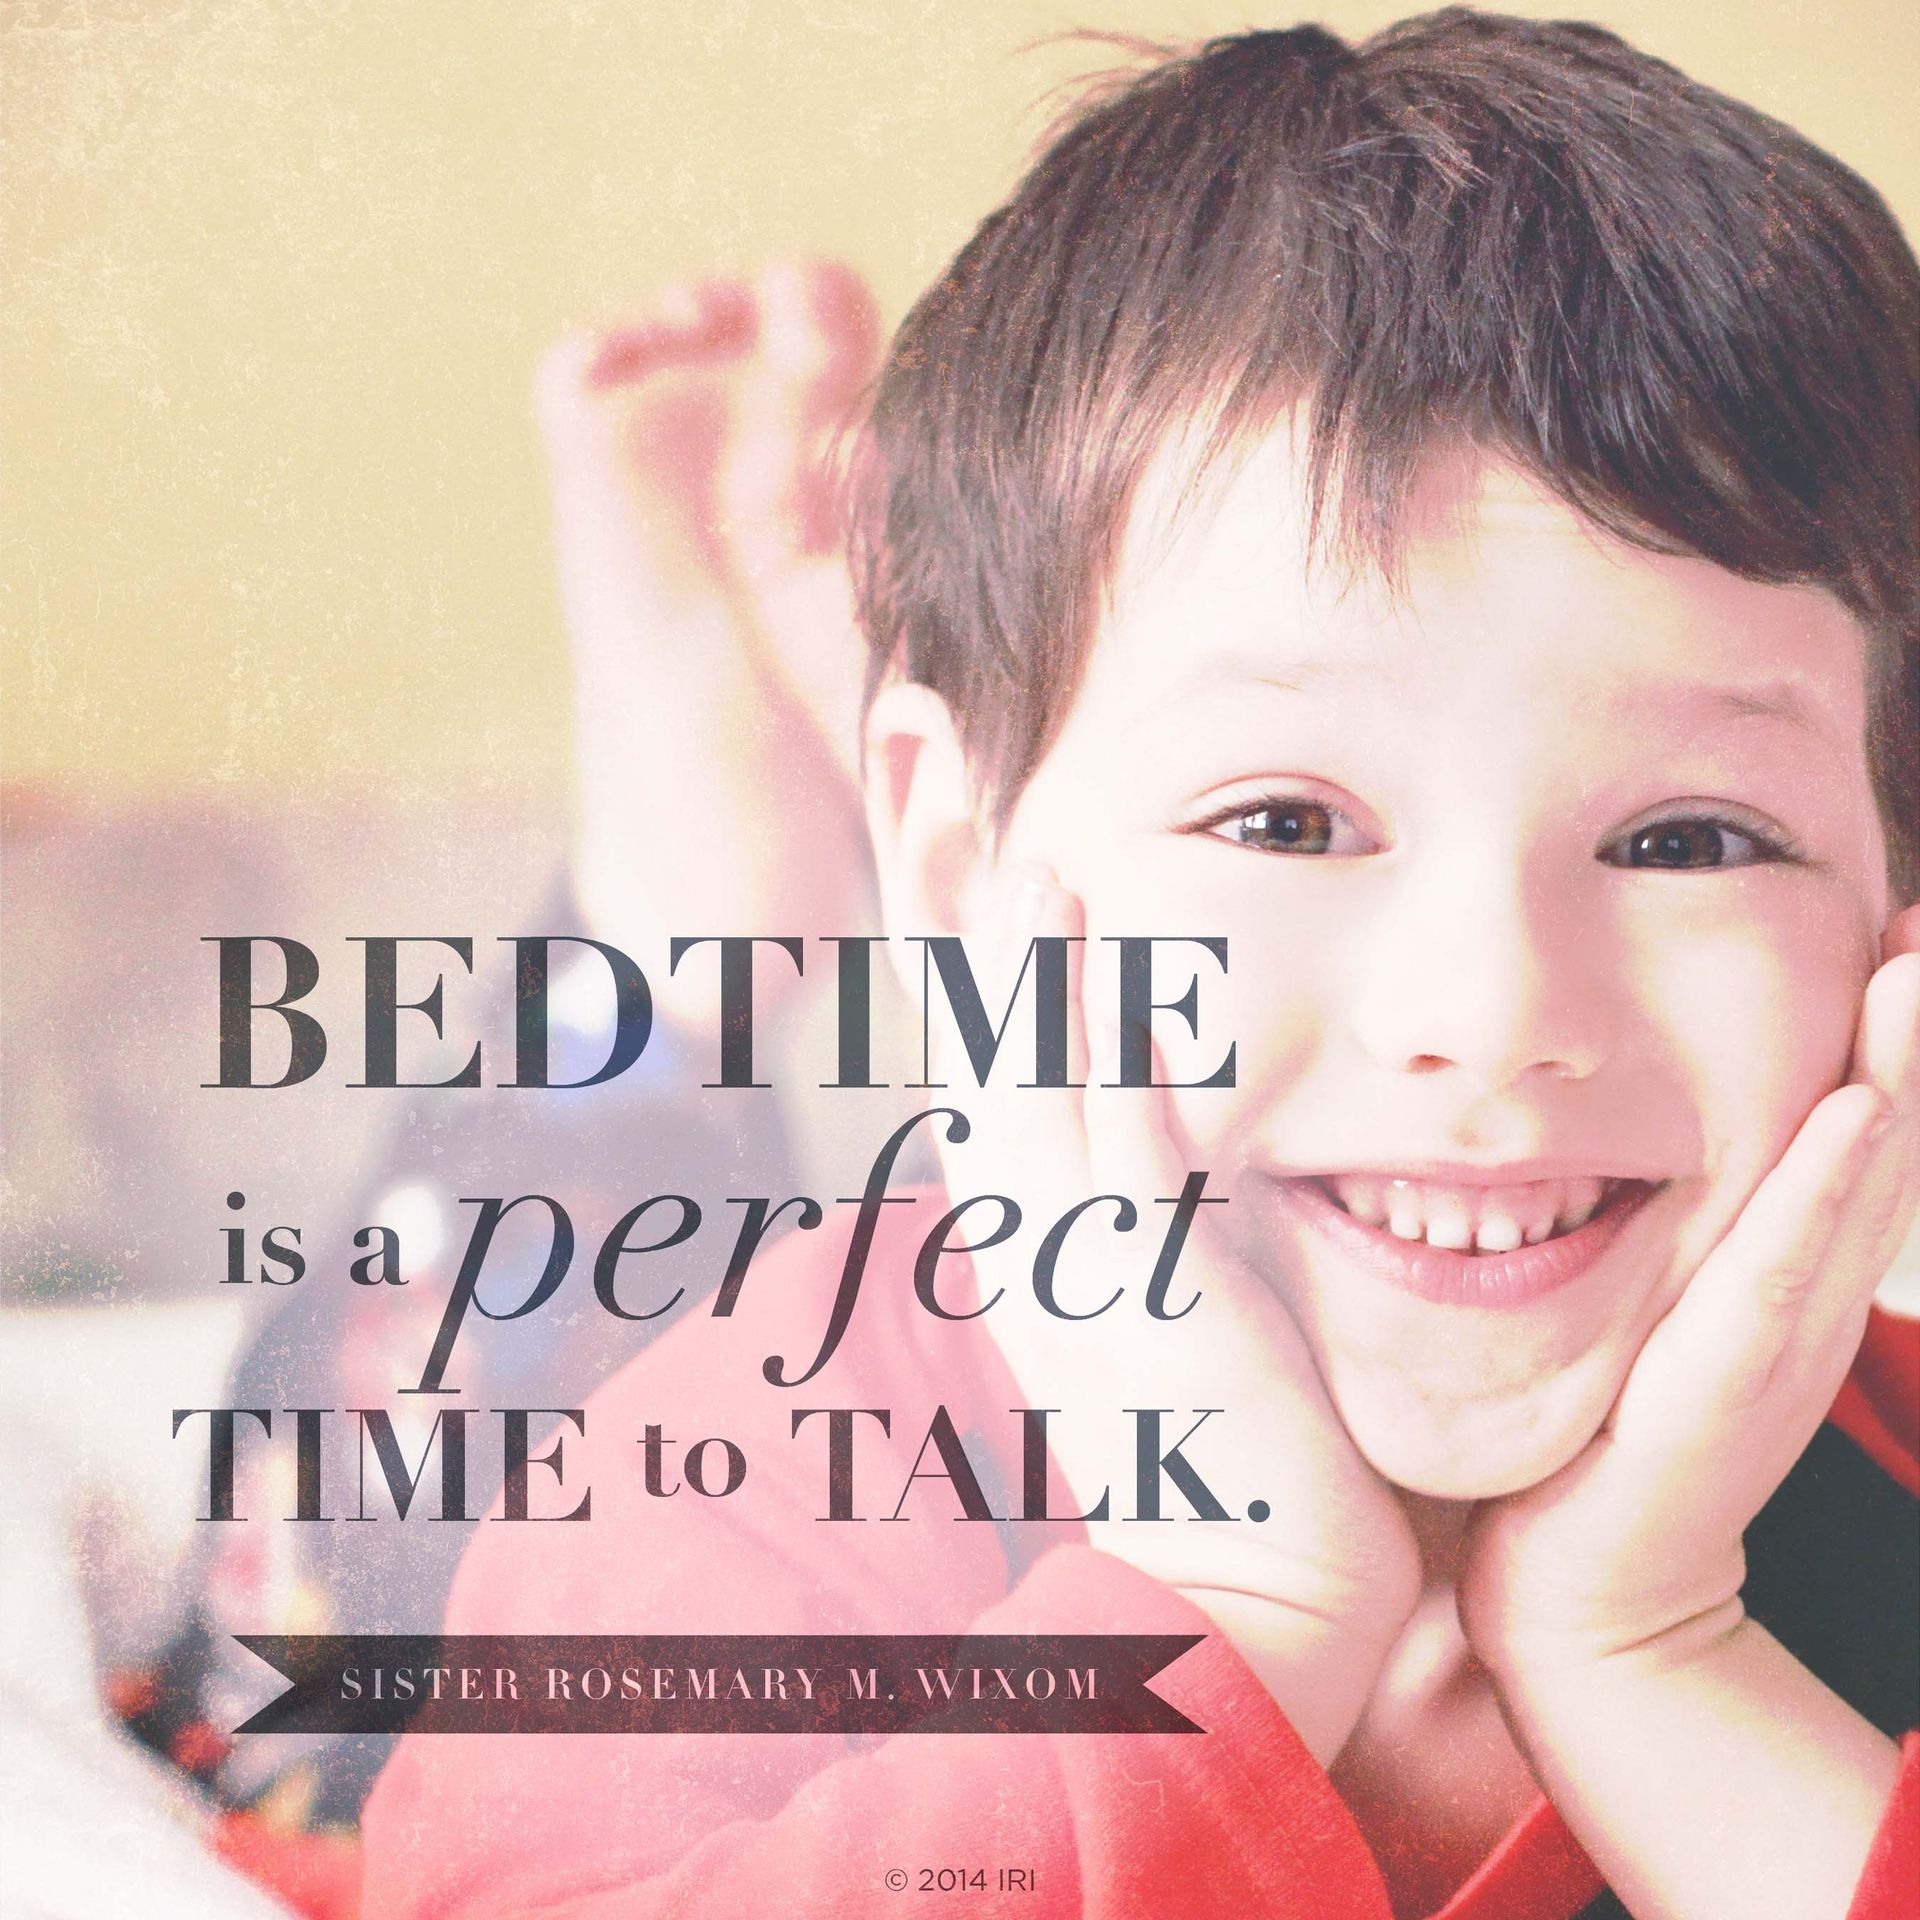 “Bedtime is a perfect time to talk.”—Sister Rosemary M. Wixom, “Taking Time to Talk and Listen”